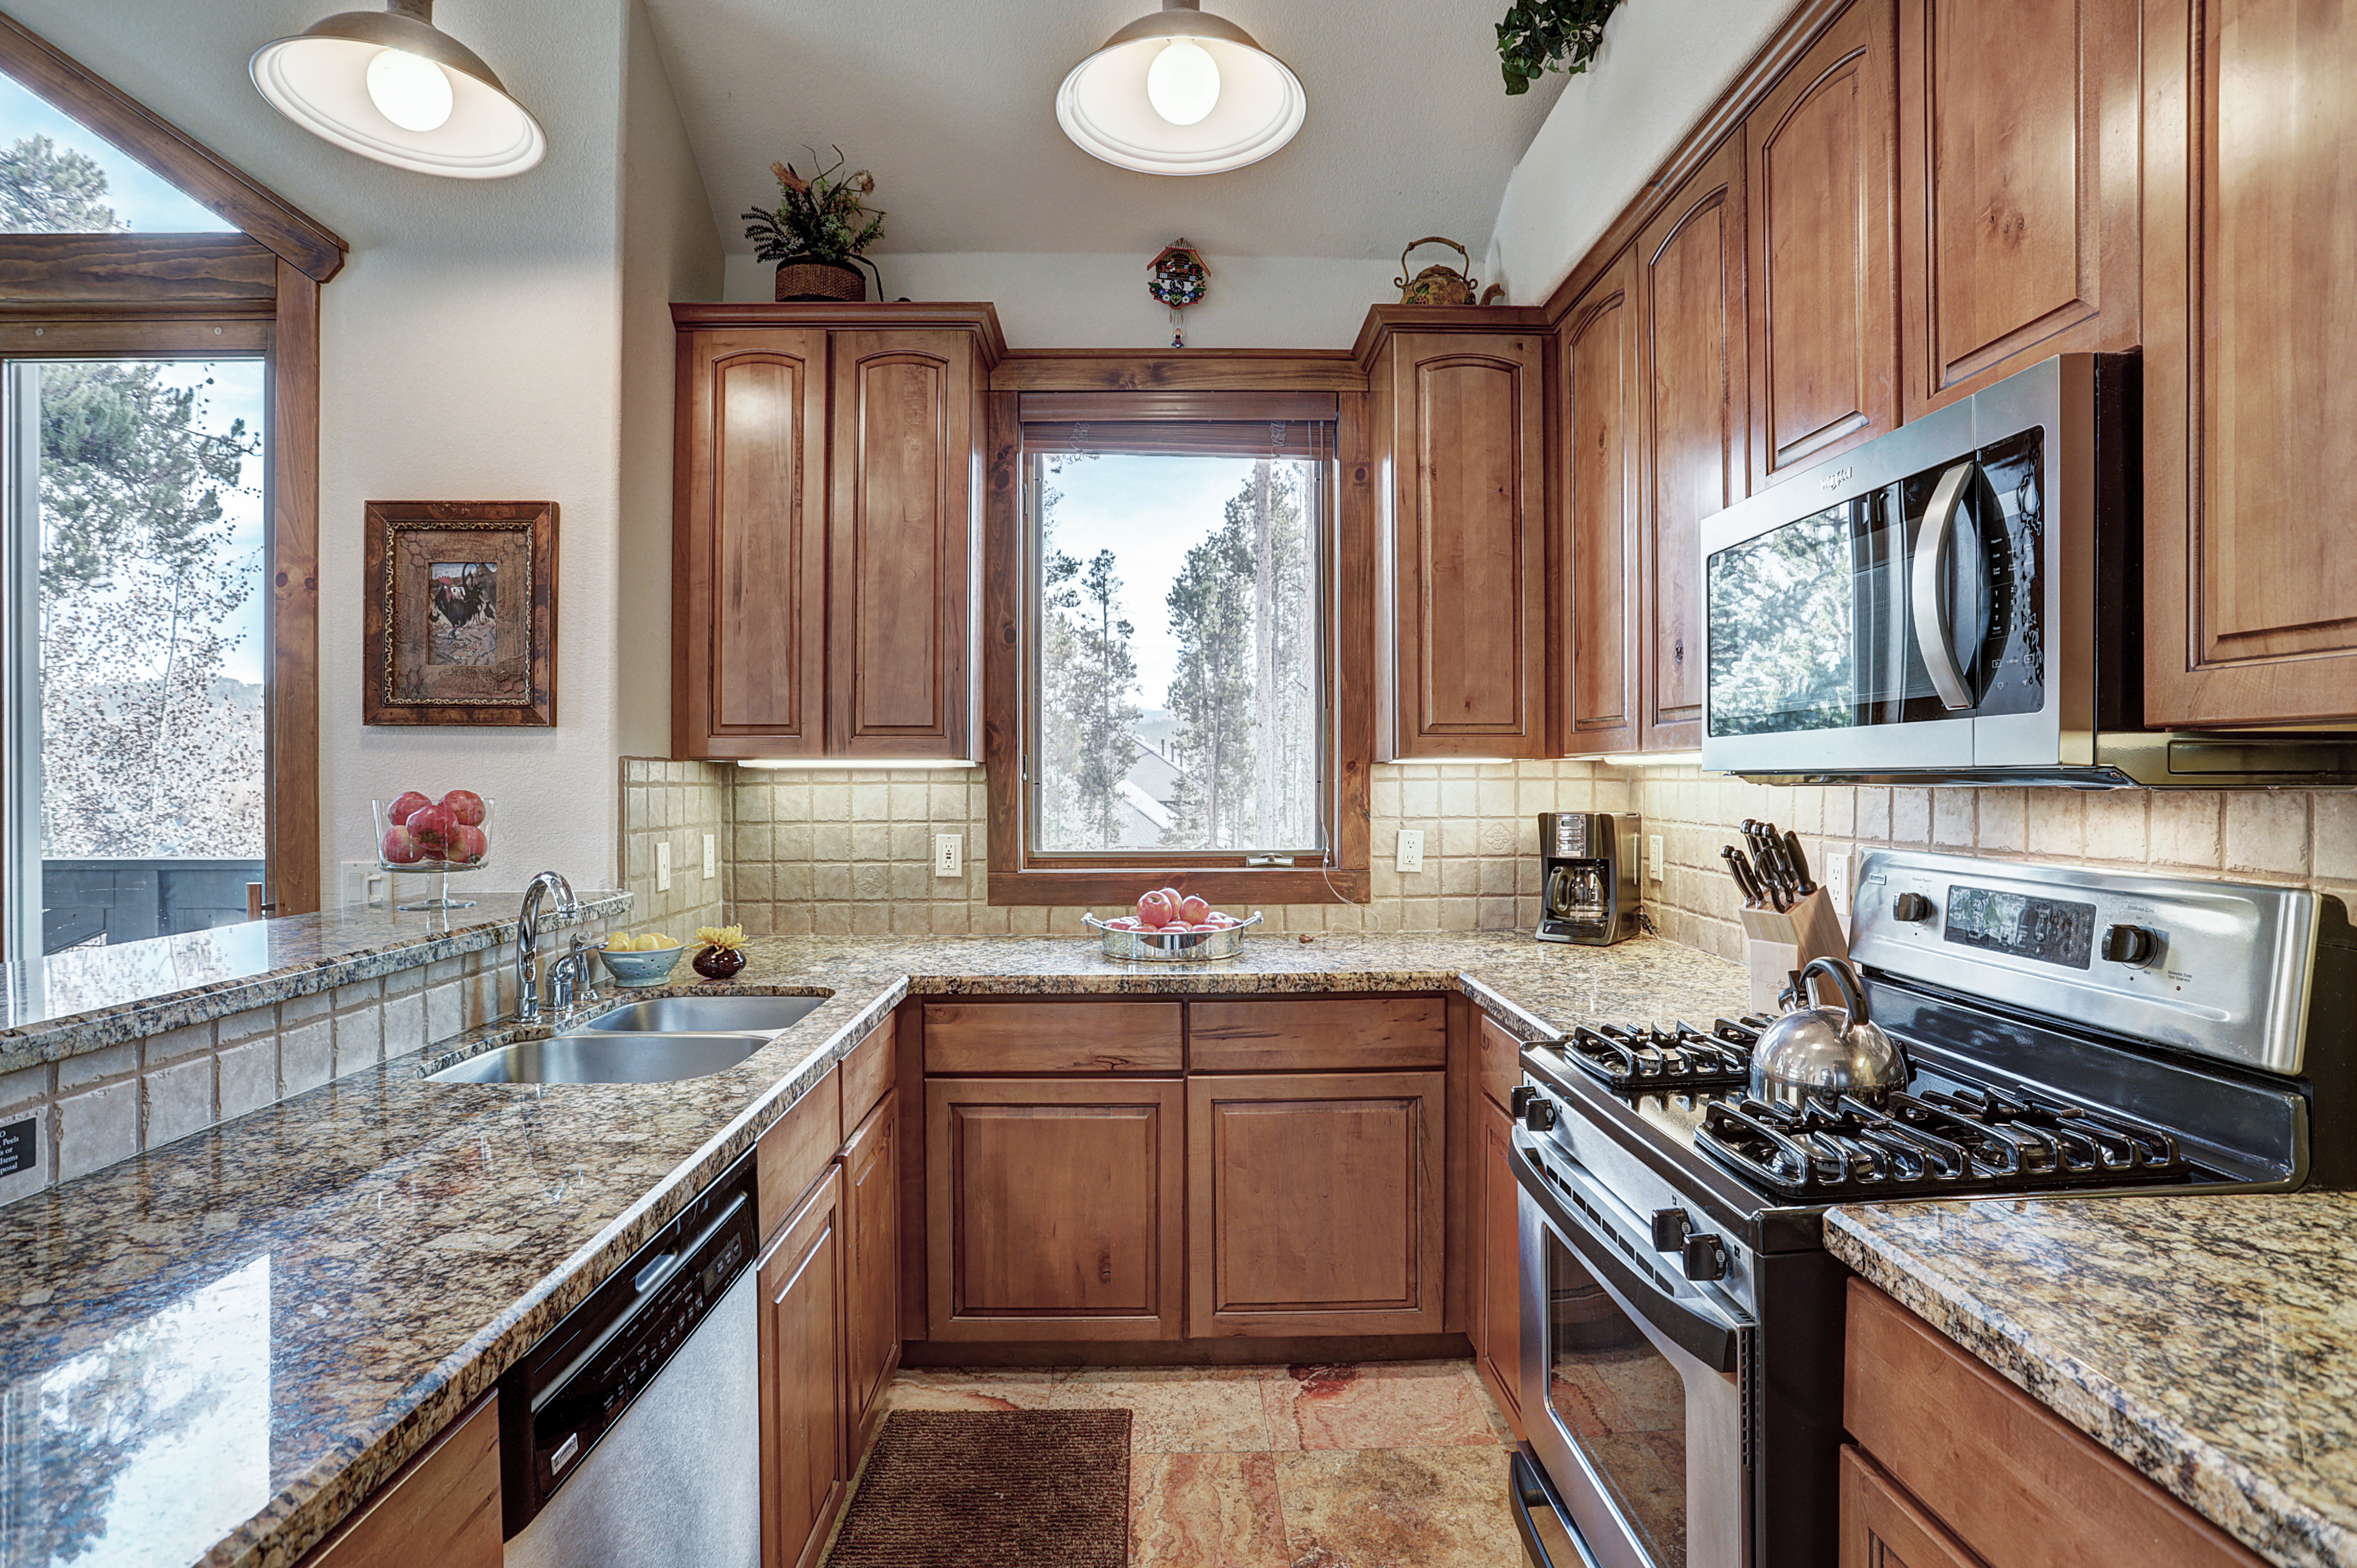 This spacious kitchen boasts updated stainless steel appliances and granite countertops - Amber Sky Breckenridge Vacation Rental